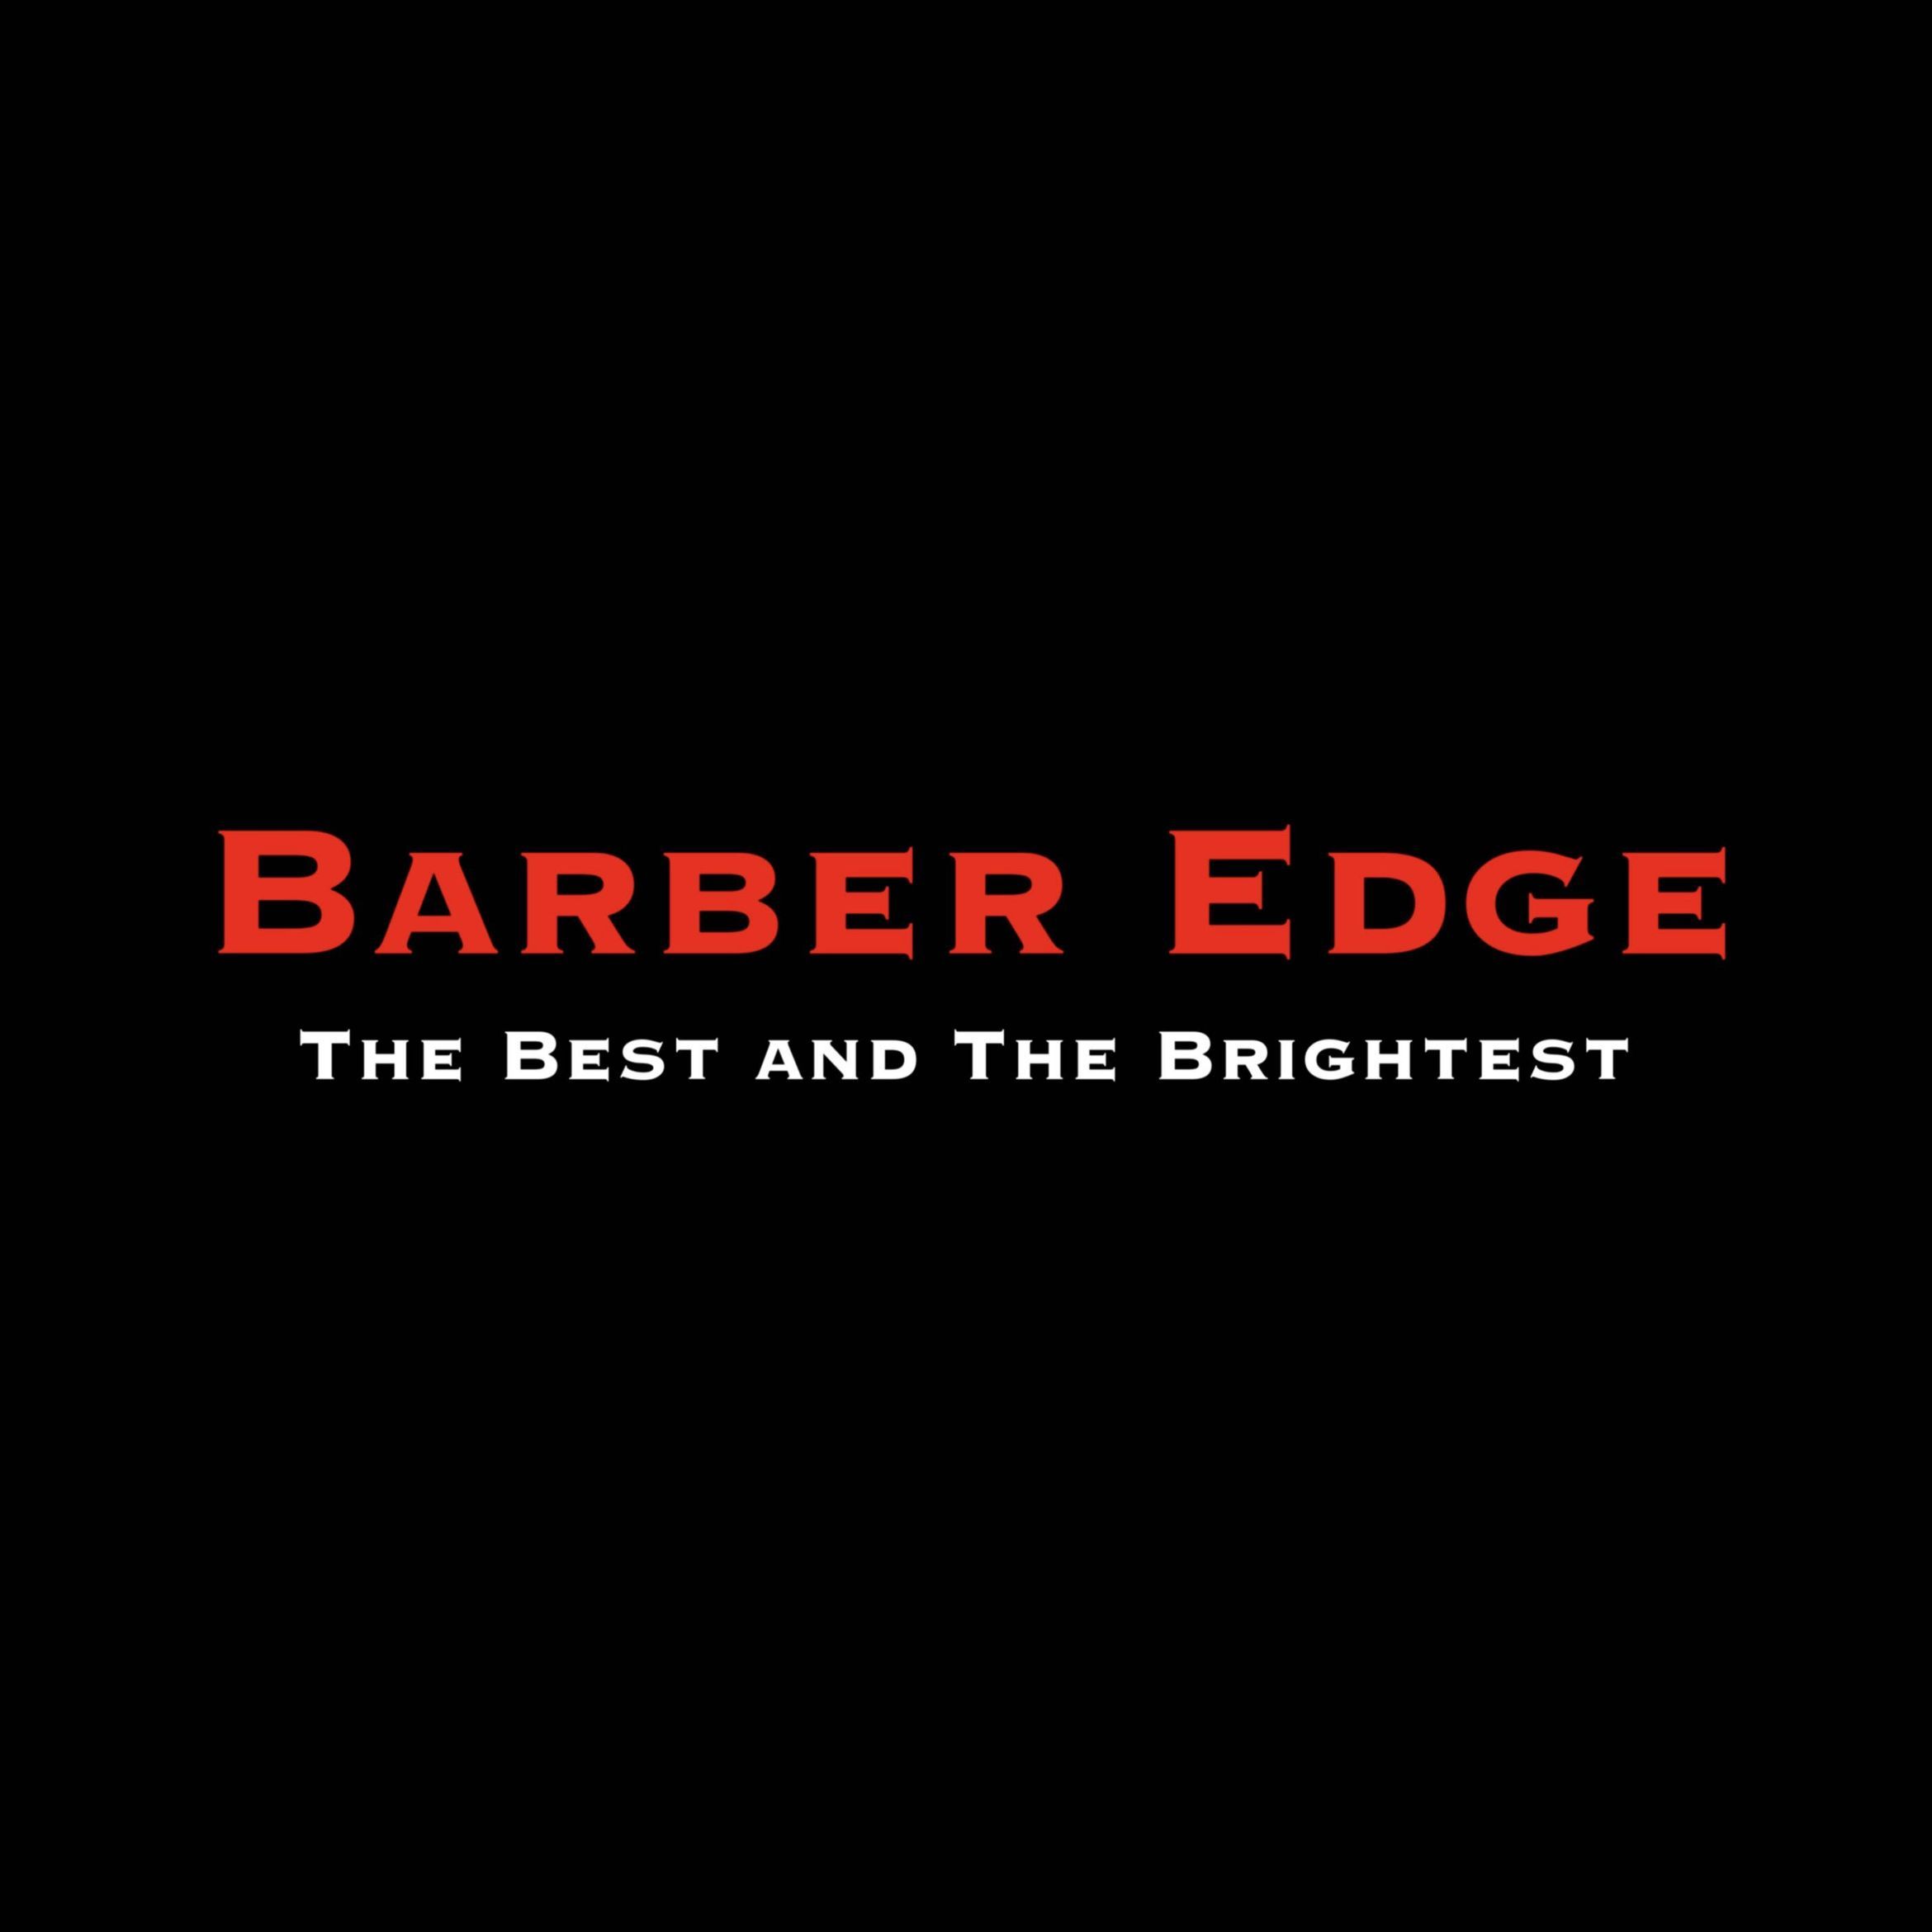 Barber Edge, 1208 East Green Dr., High Point, 27260